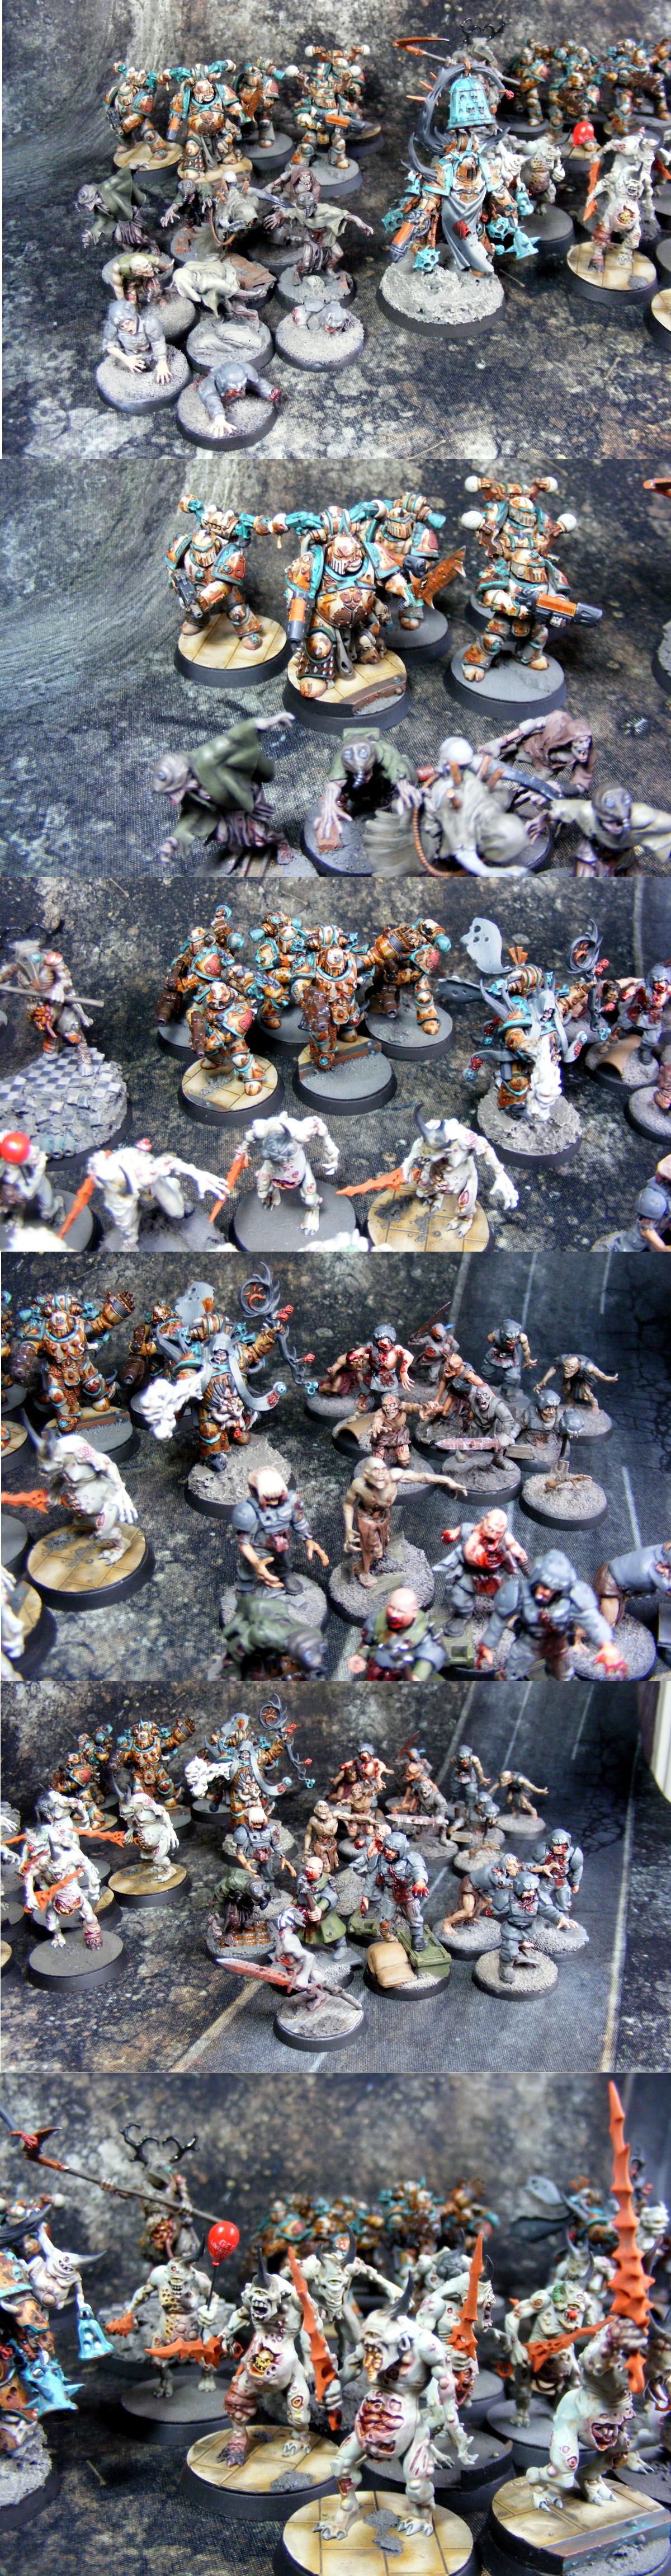 Apostles Of Contagion, Army, Daemons, Death Guard, Nurgle, Plague Brearers, Plague Marines, Plague Zombies, Pox Walkers, Warhammer 40,000